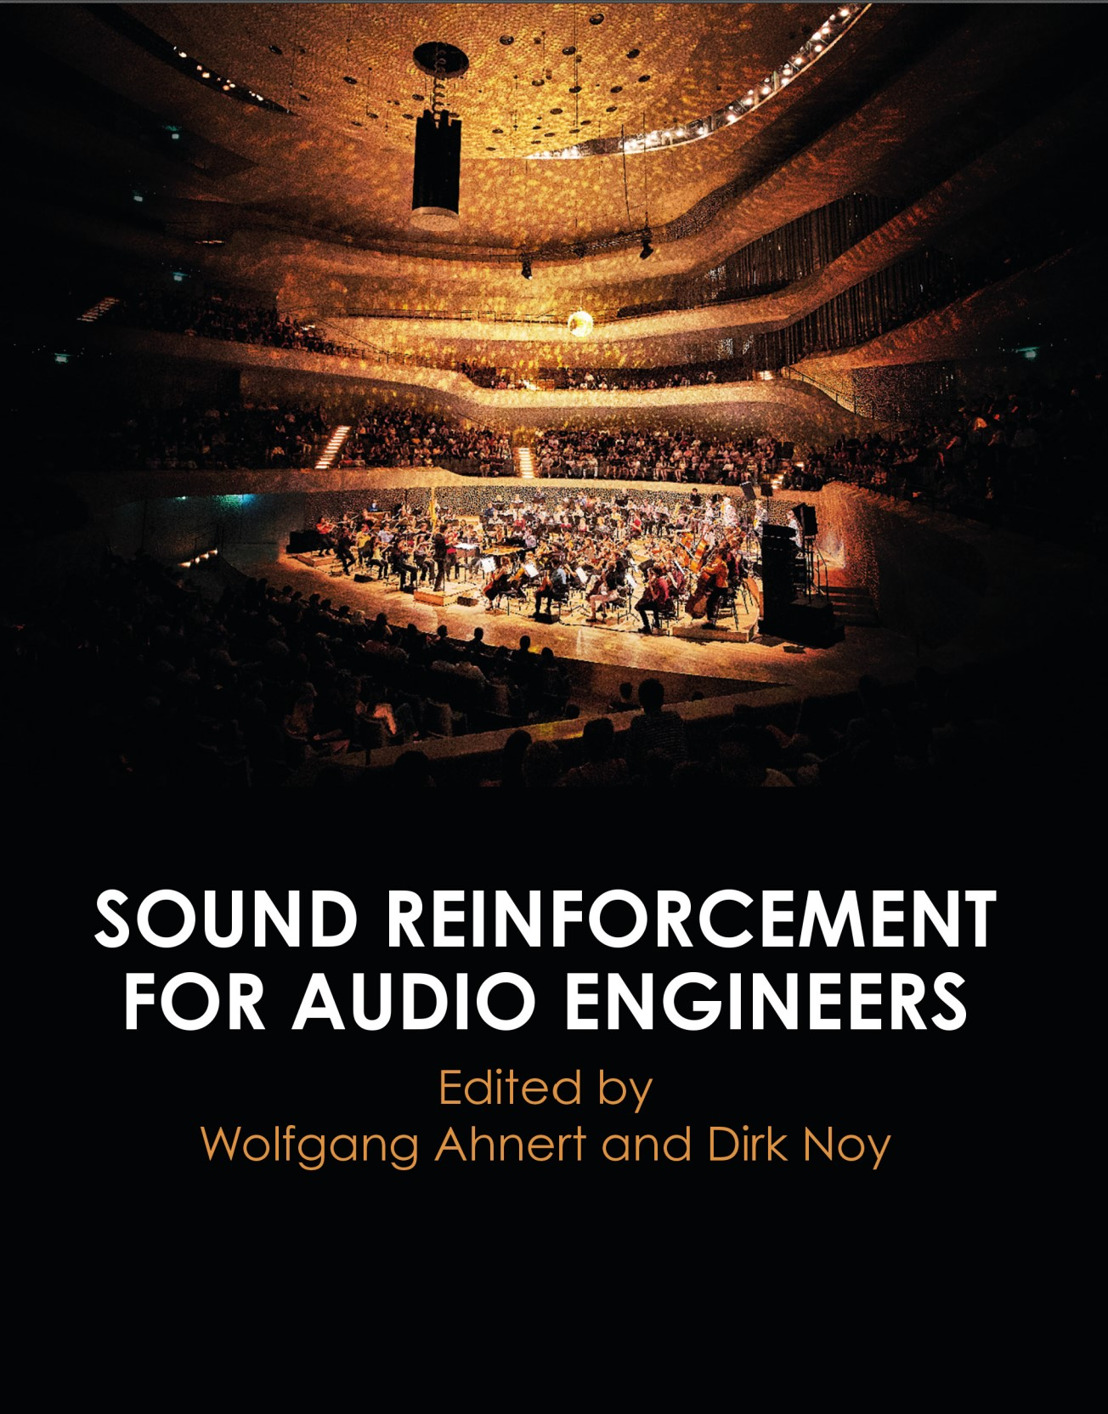 WSDG Announces Publication of ‘Sound Reinforcement for Audio Engineers’ by Dr. Wolfgang Ahnert and Dirk Noy